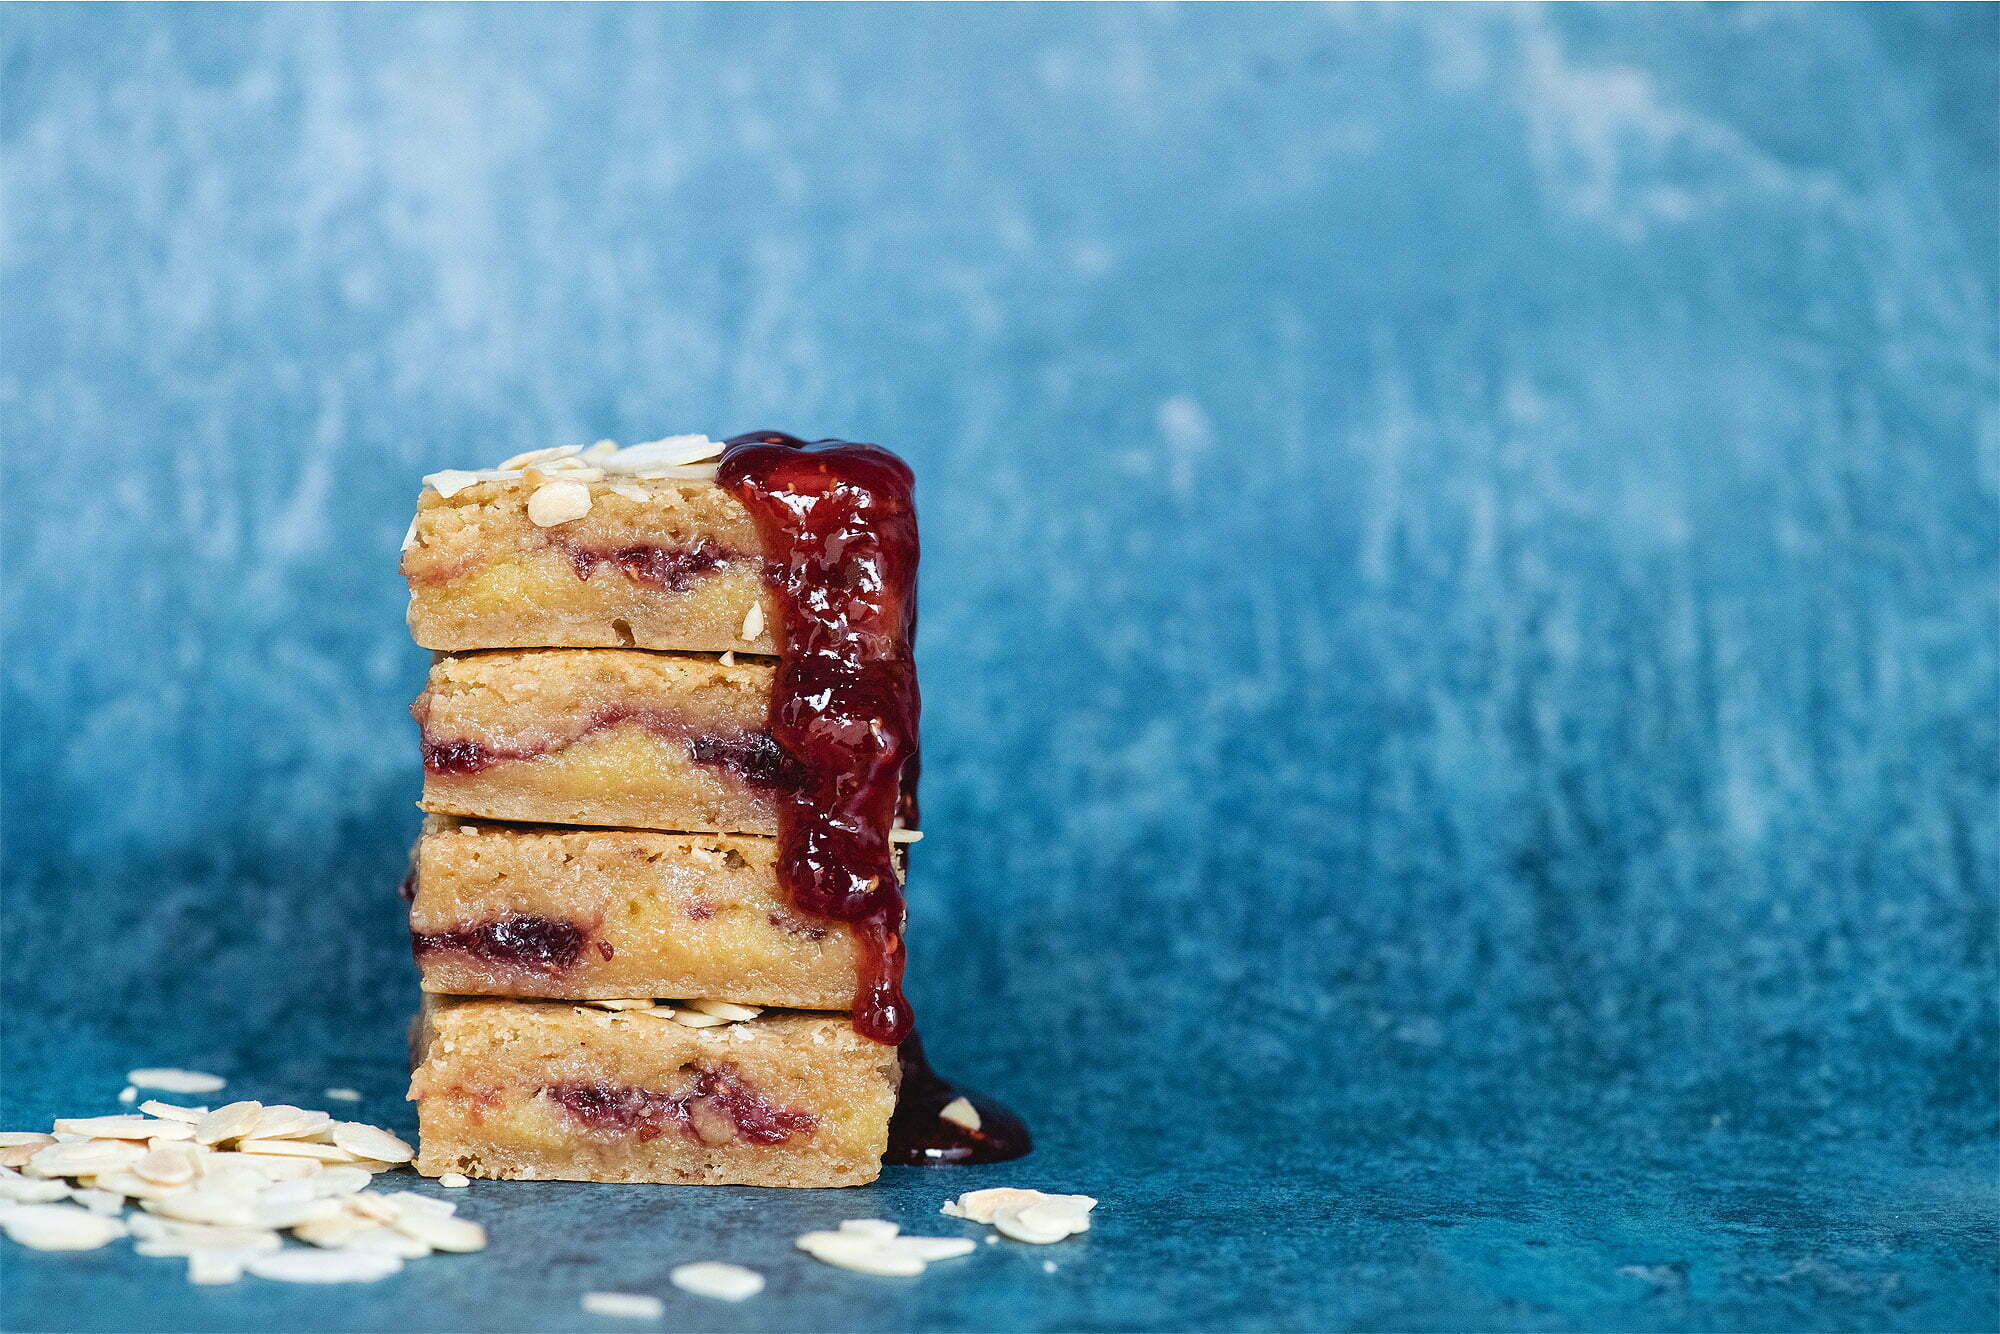 Best selling Blakewell flavour stacked with jam drizzling on a blue background